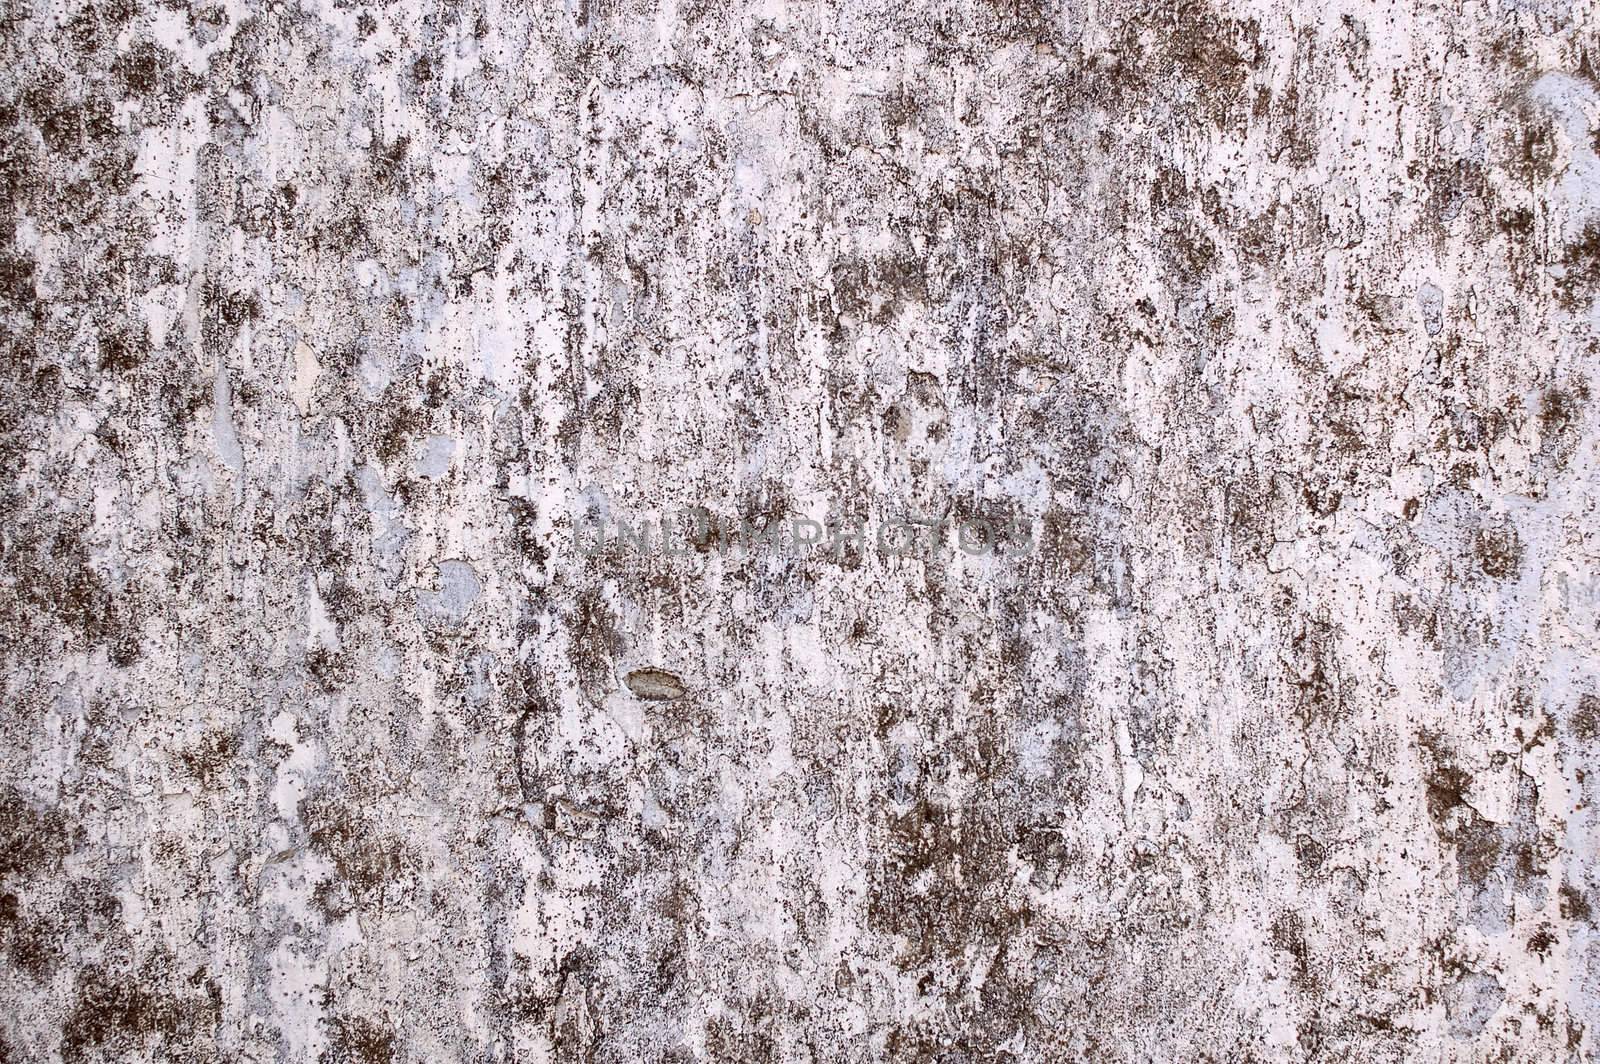 Very old painted concrete wall - brutal background (texture).